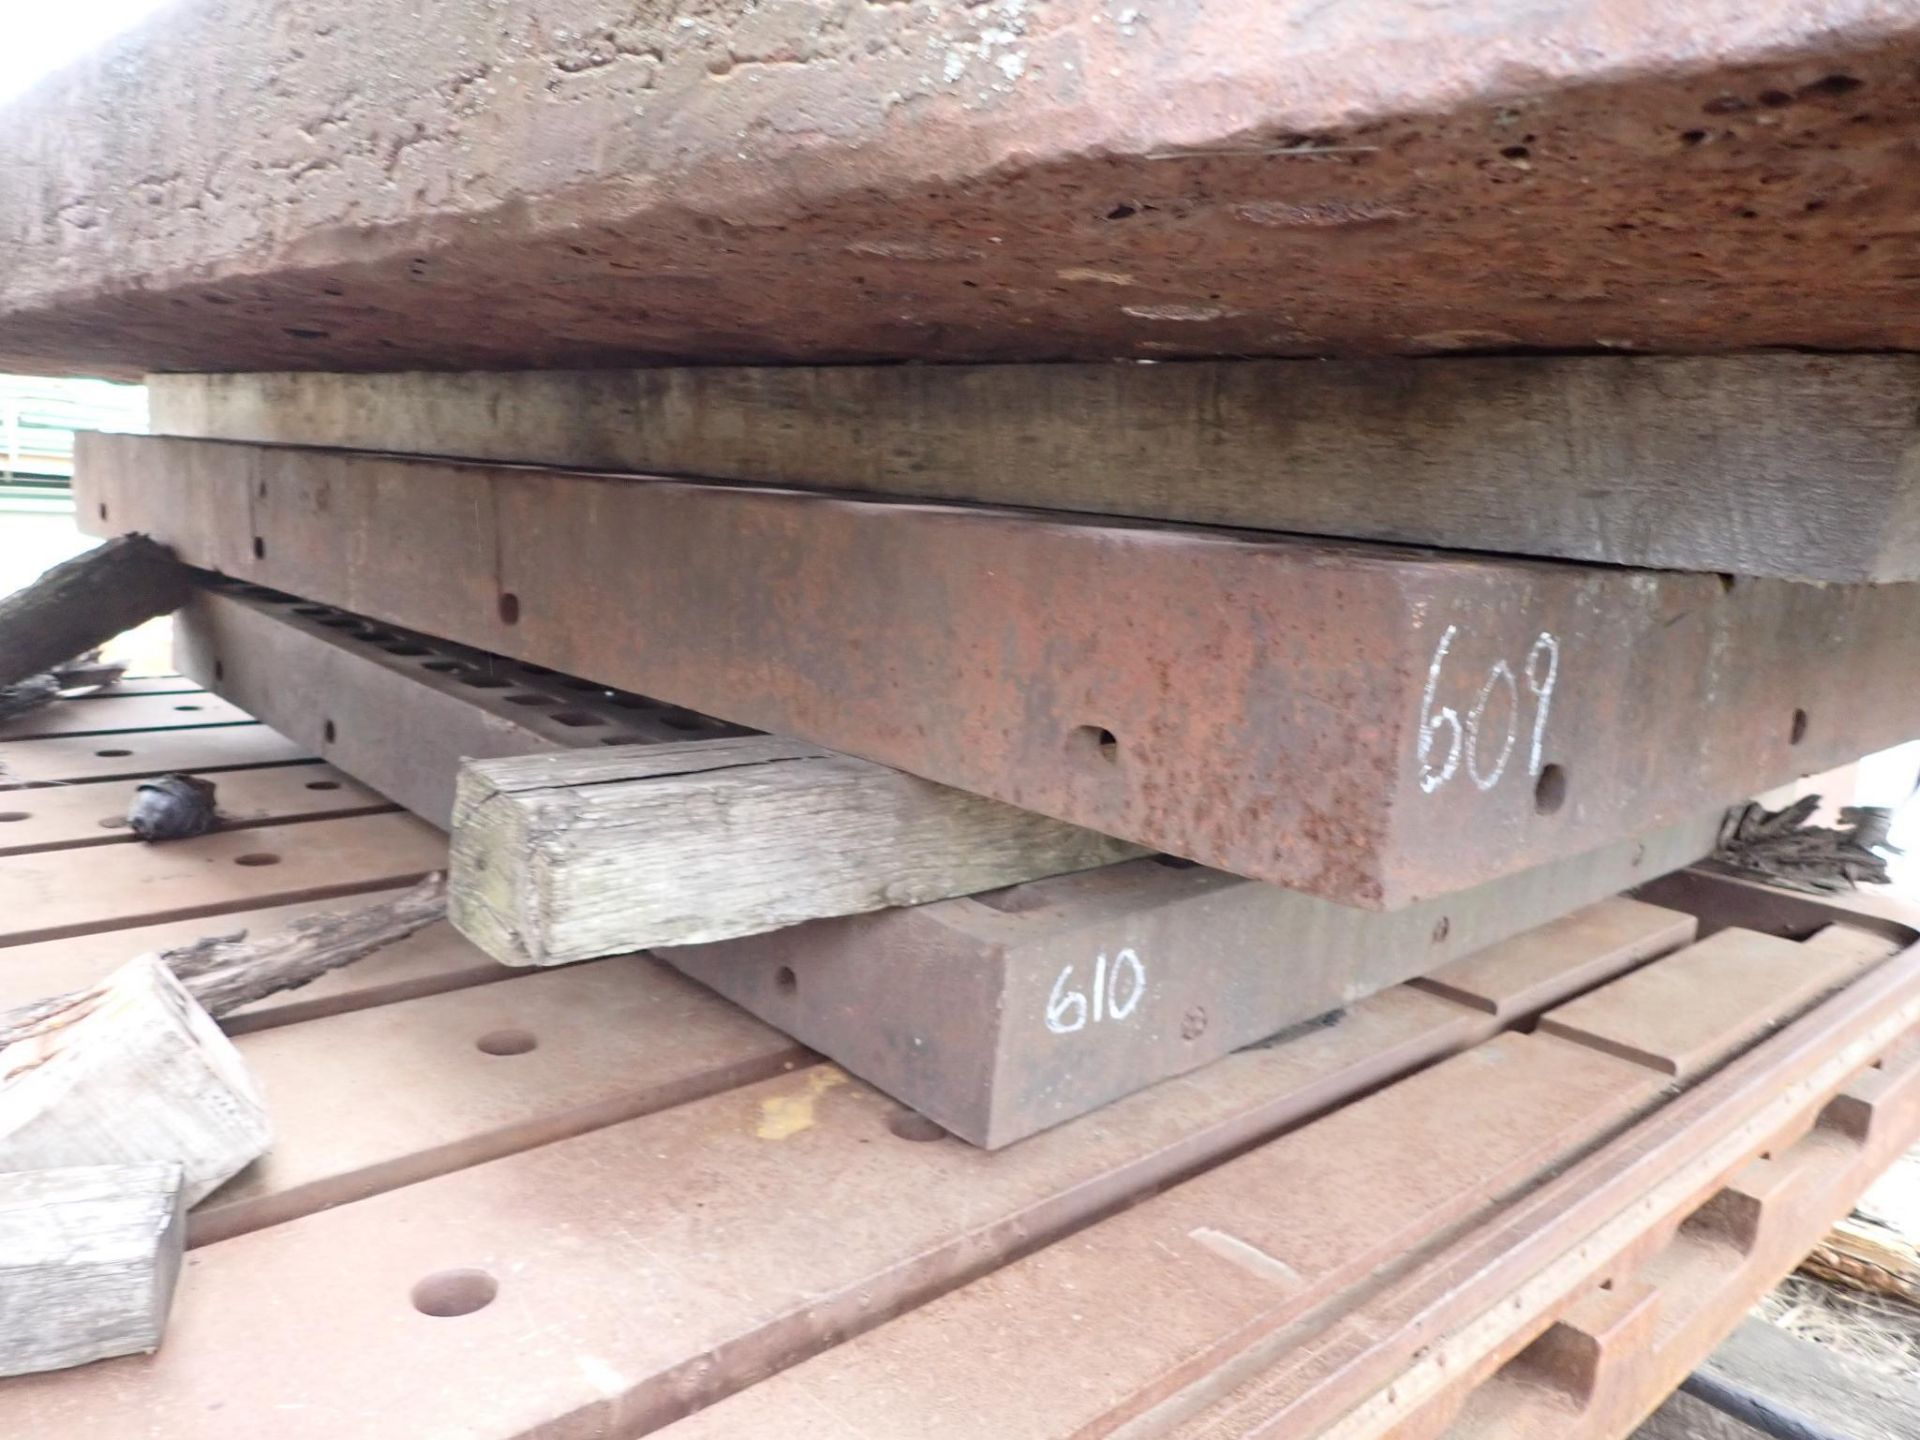 Acorn Type Welding Platen 86" x 61" x 6" high 1-7/8" square holes This item will have an additional